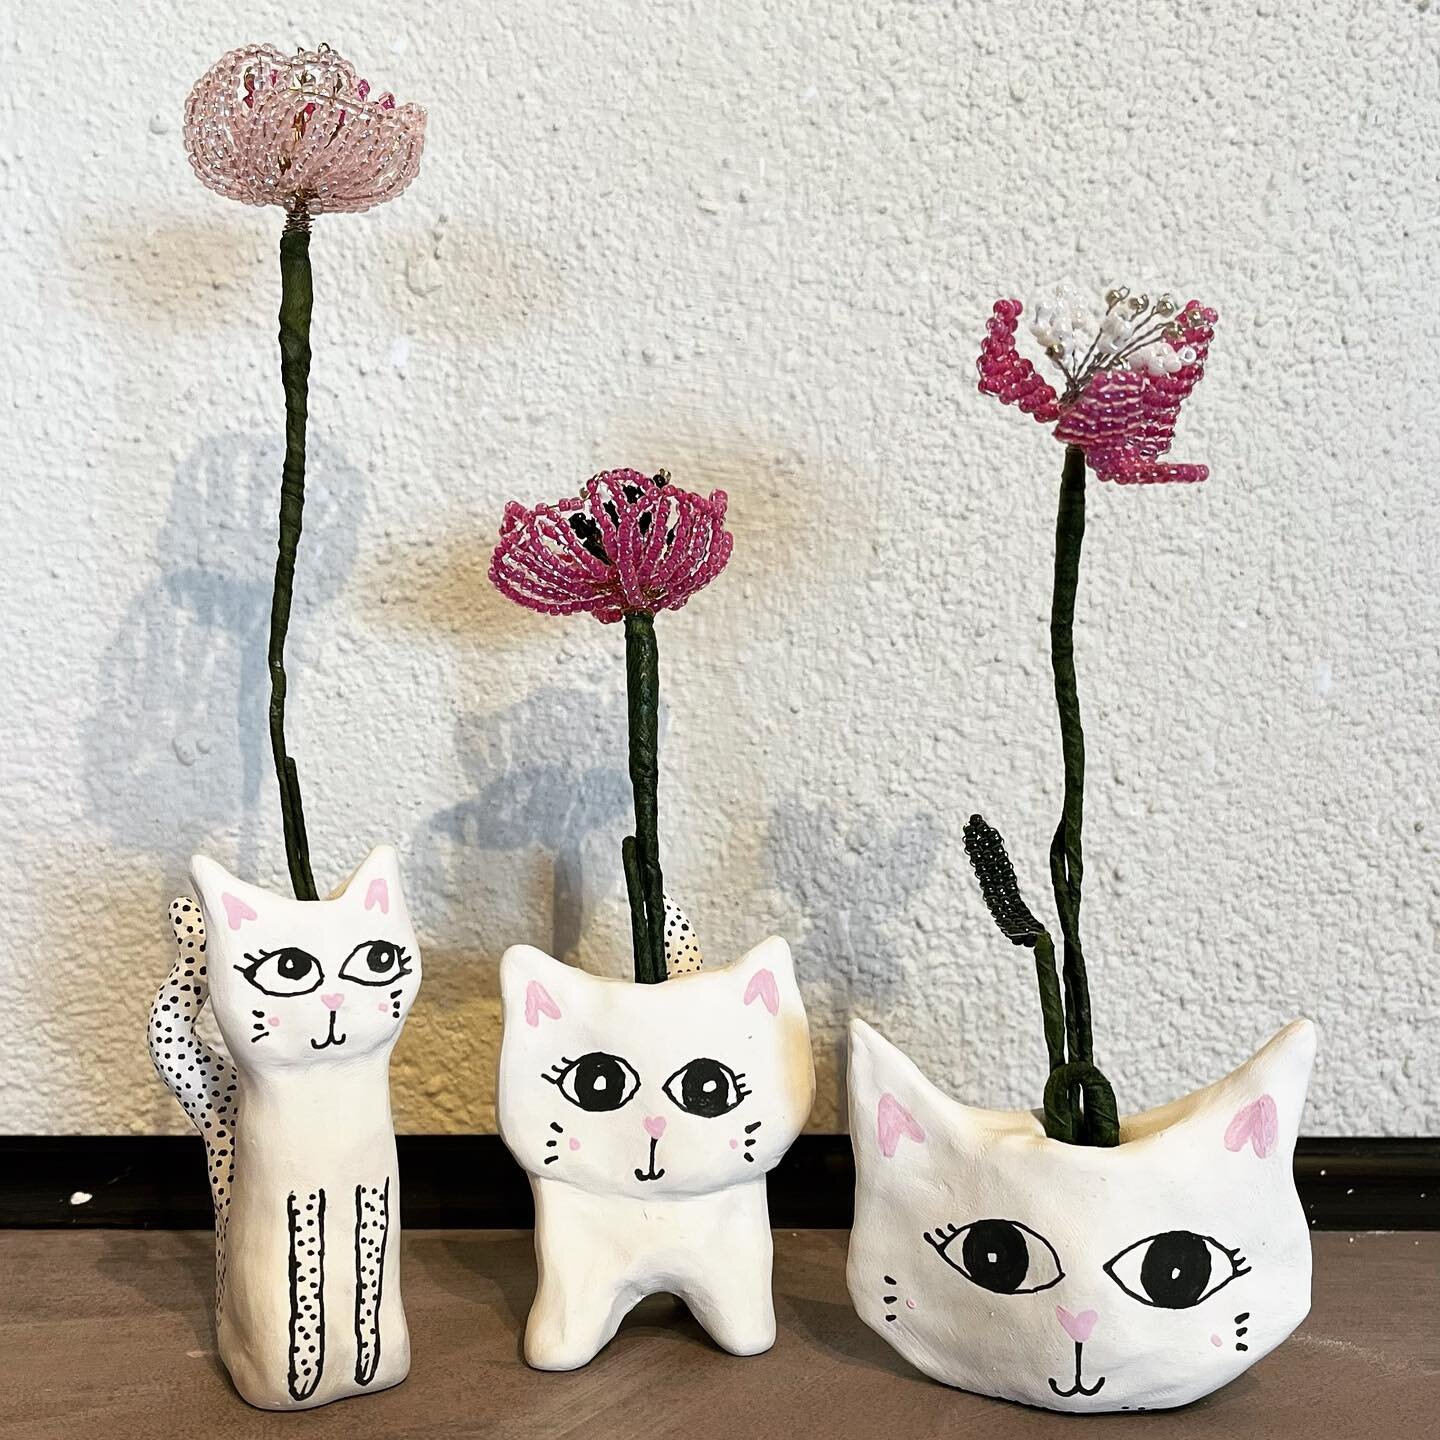 100 Cats in 100 Days 😻 These are days 75, 76, 77 - check out my highlights (100 Cats and More Cats) for days 1-74 😽 
They will all be for sale after the project is finished, stay tuned 😻
.
.
.
.
.
. #birkelundboutique #birkelundkeramik #h&aring;nd